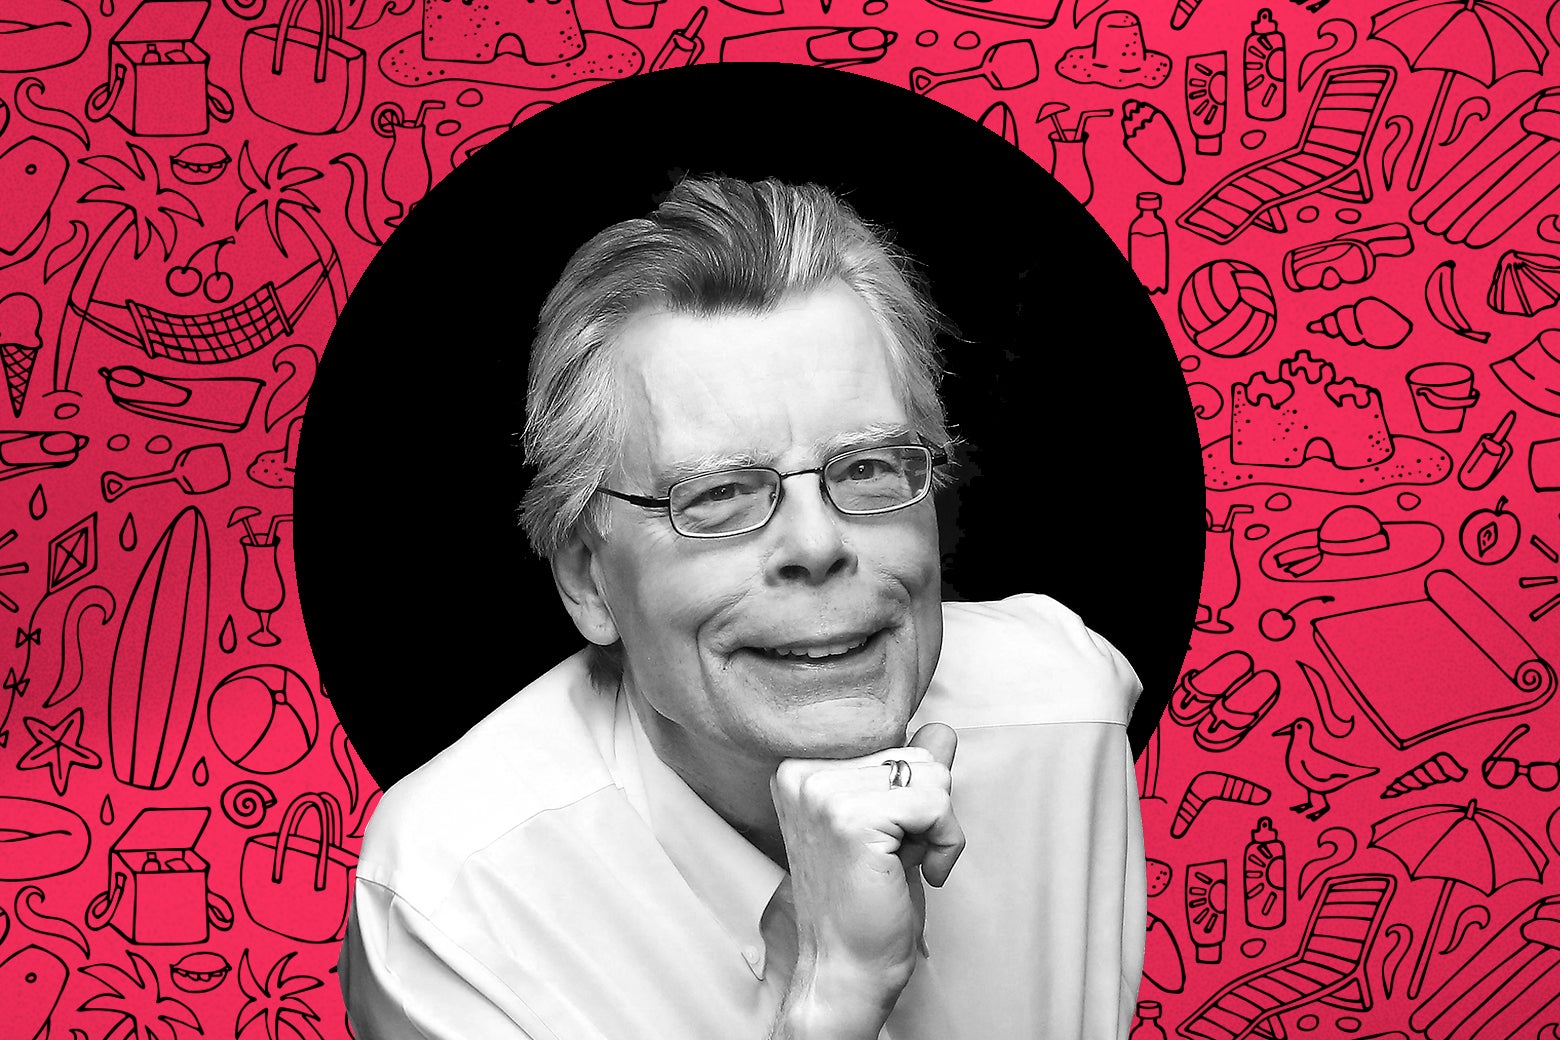 Stephen King as Dear Prudence: My husband is floundering under the